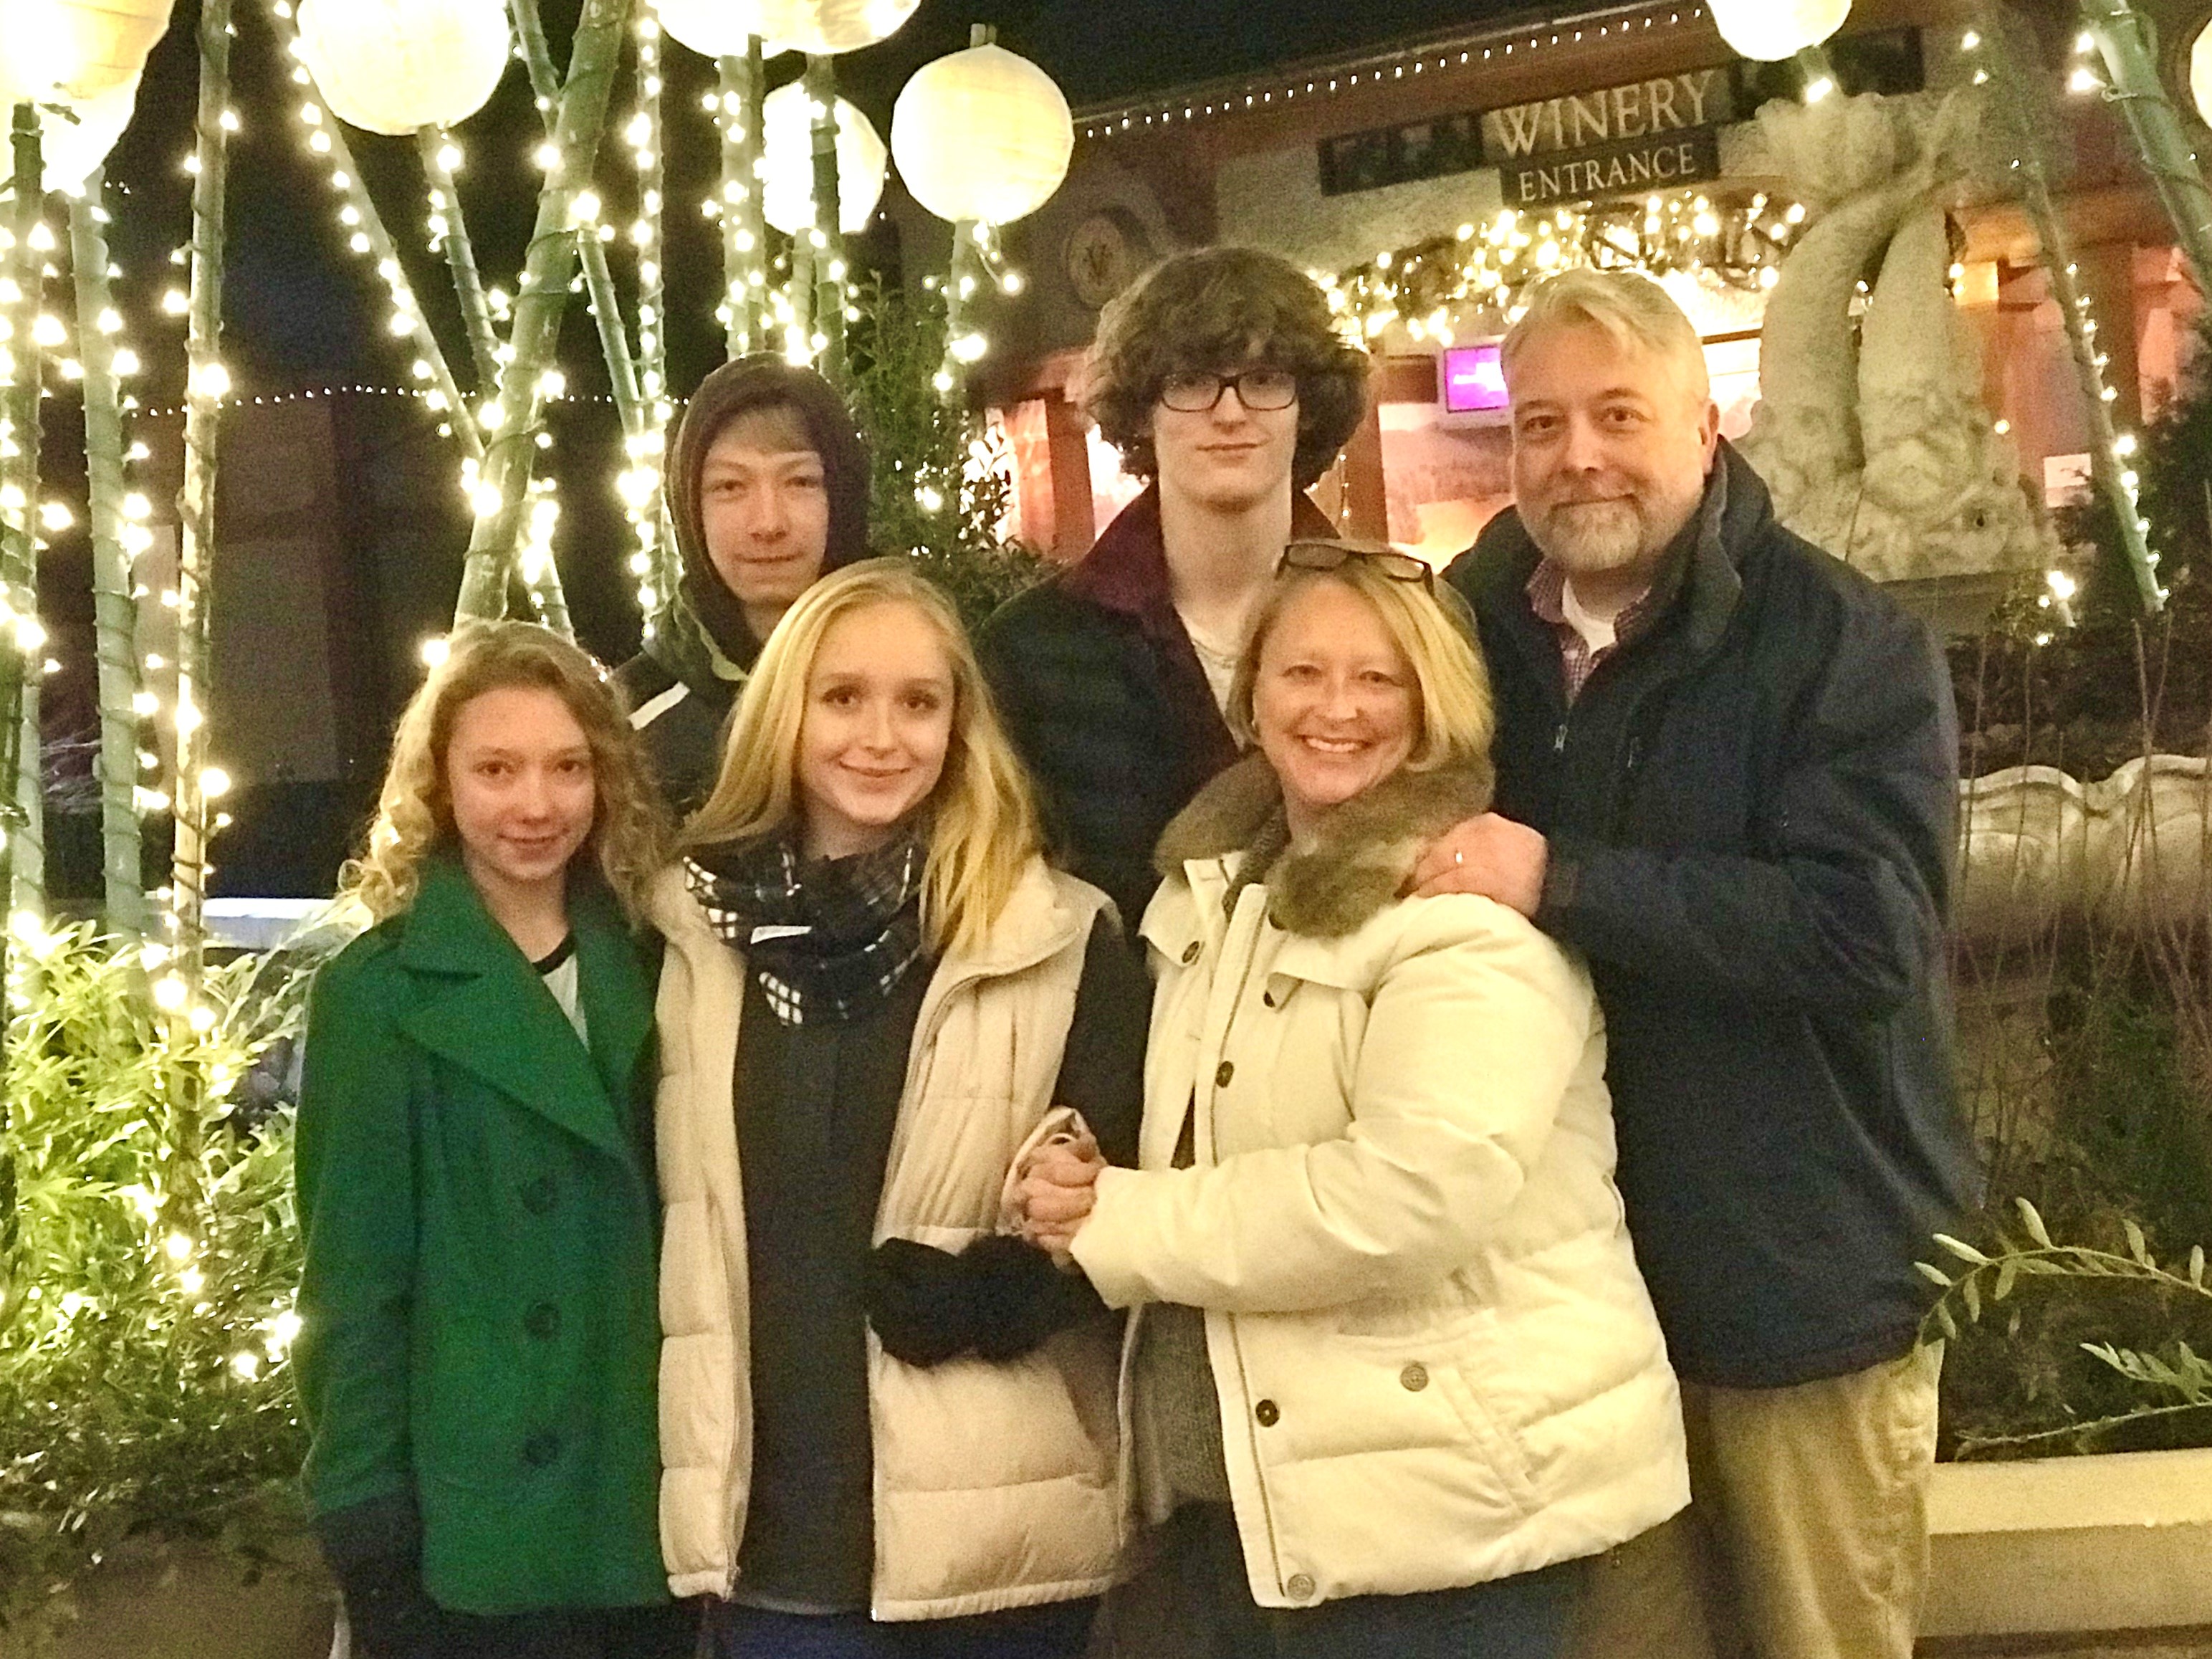 Baxter employee with his family at a holiday market